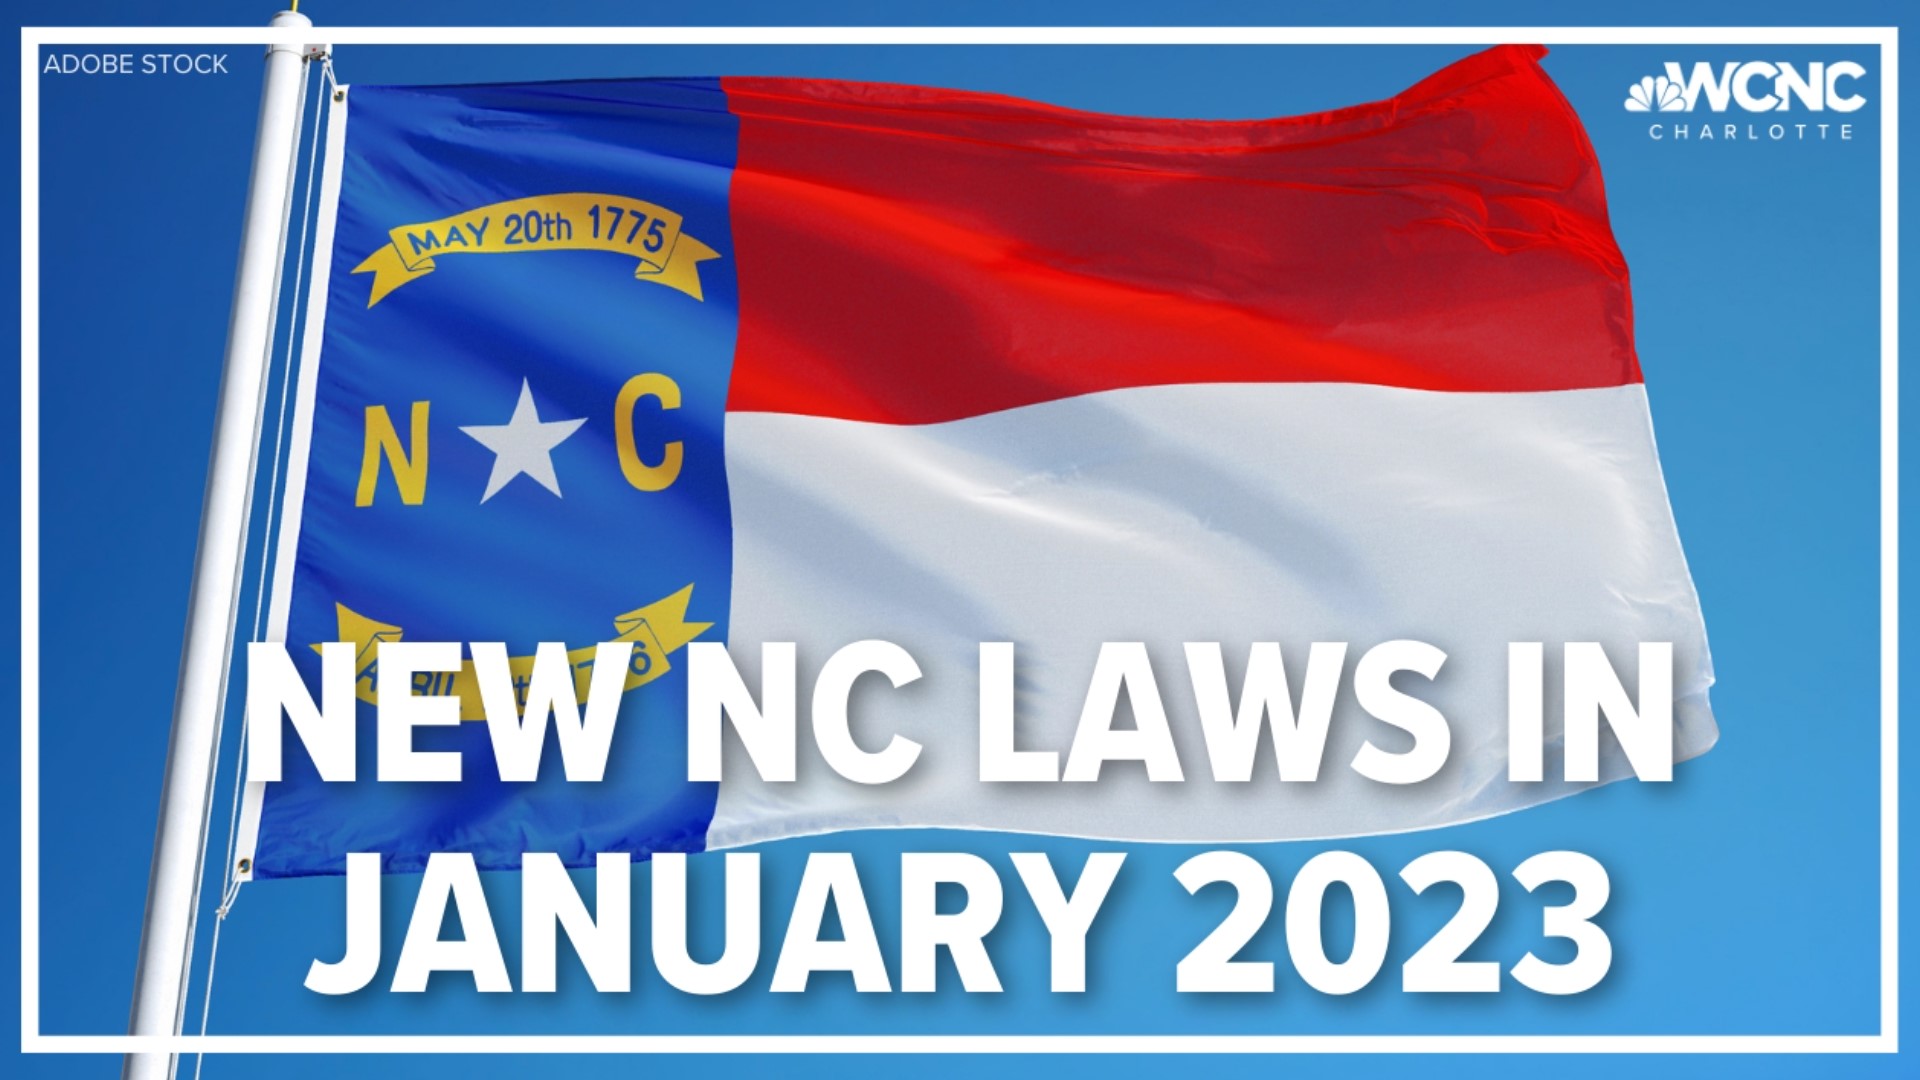 With the new year comes new laws in North Carolina that go into effect on Jan. 1.